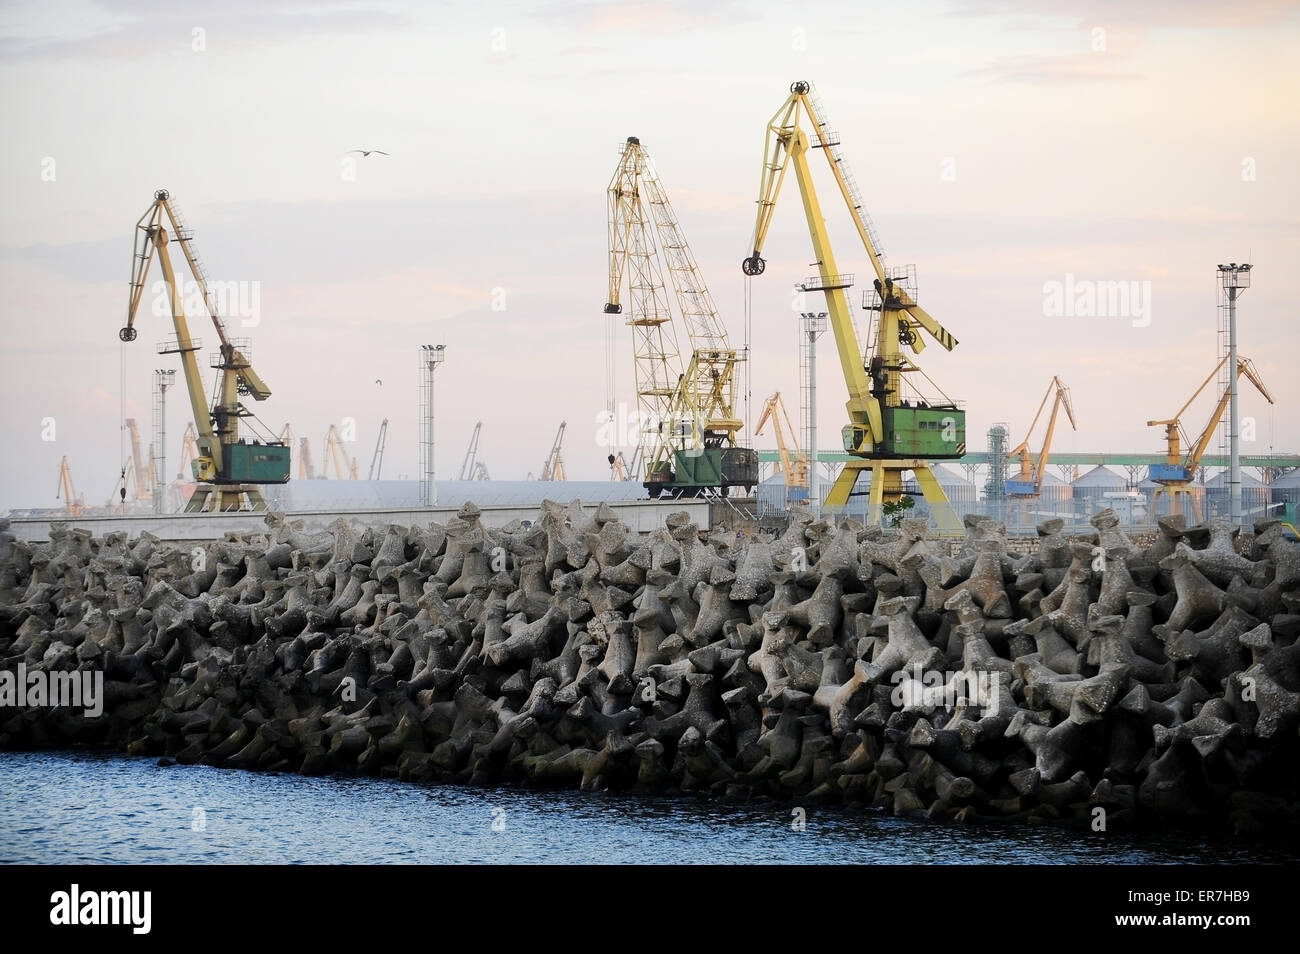 Industrial port with shipping cranes at sunset Stock Photo